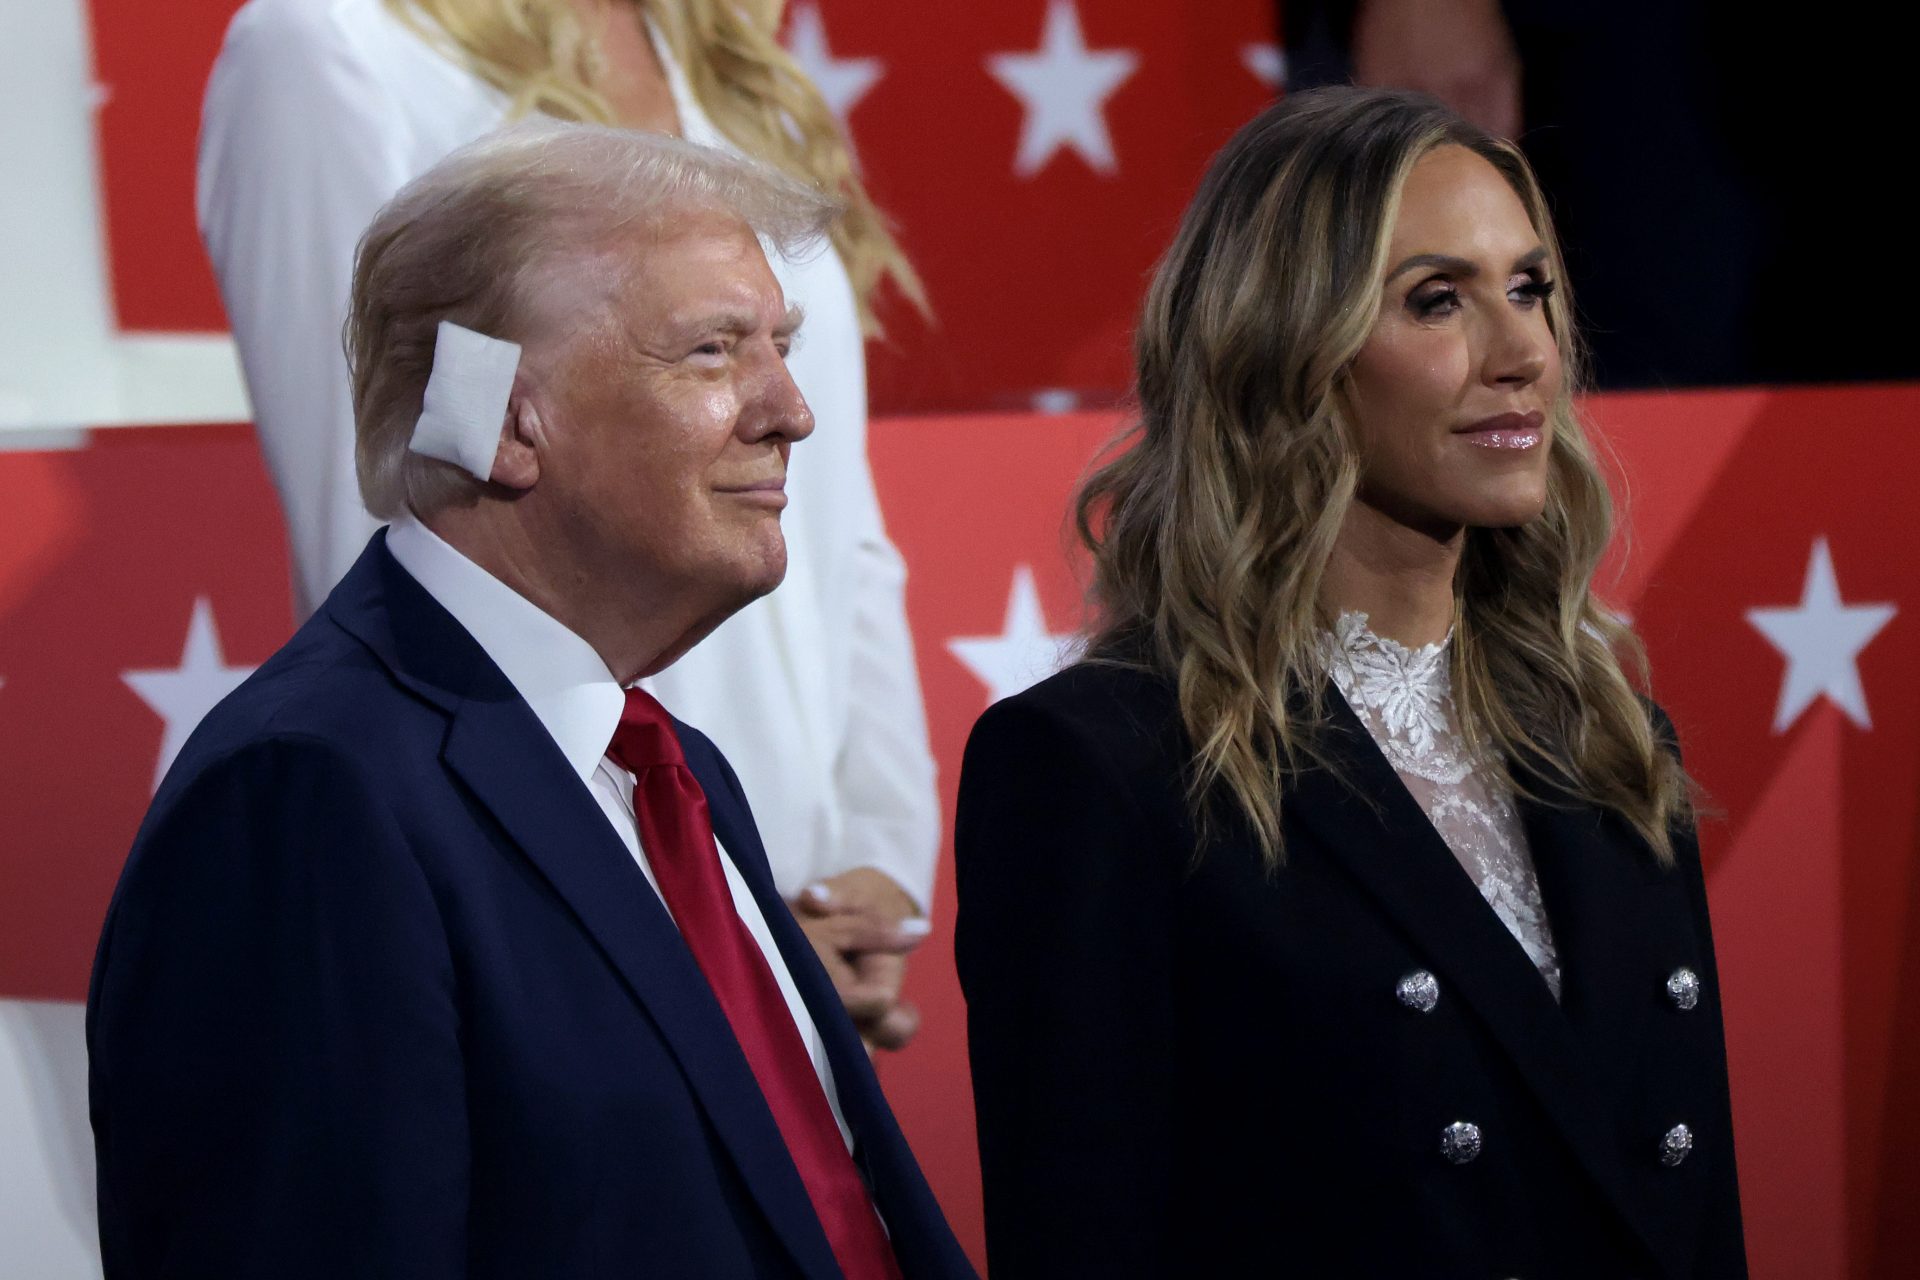 Trump’s daughter-in-law publicly attacked Kamala Harris in a really weird way